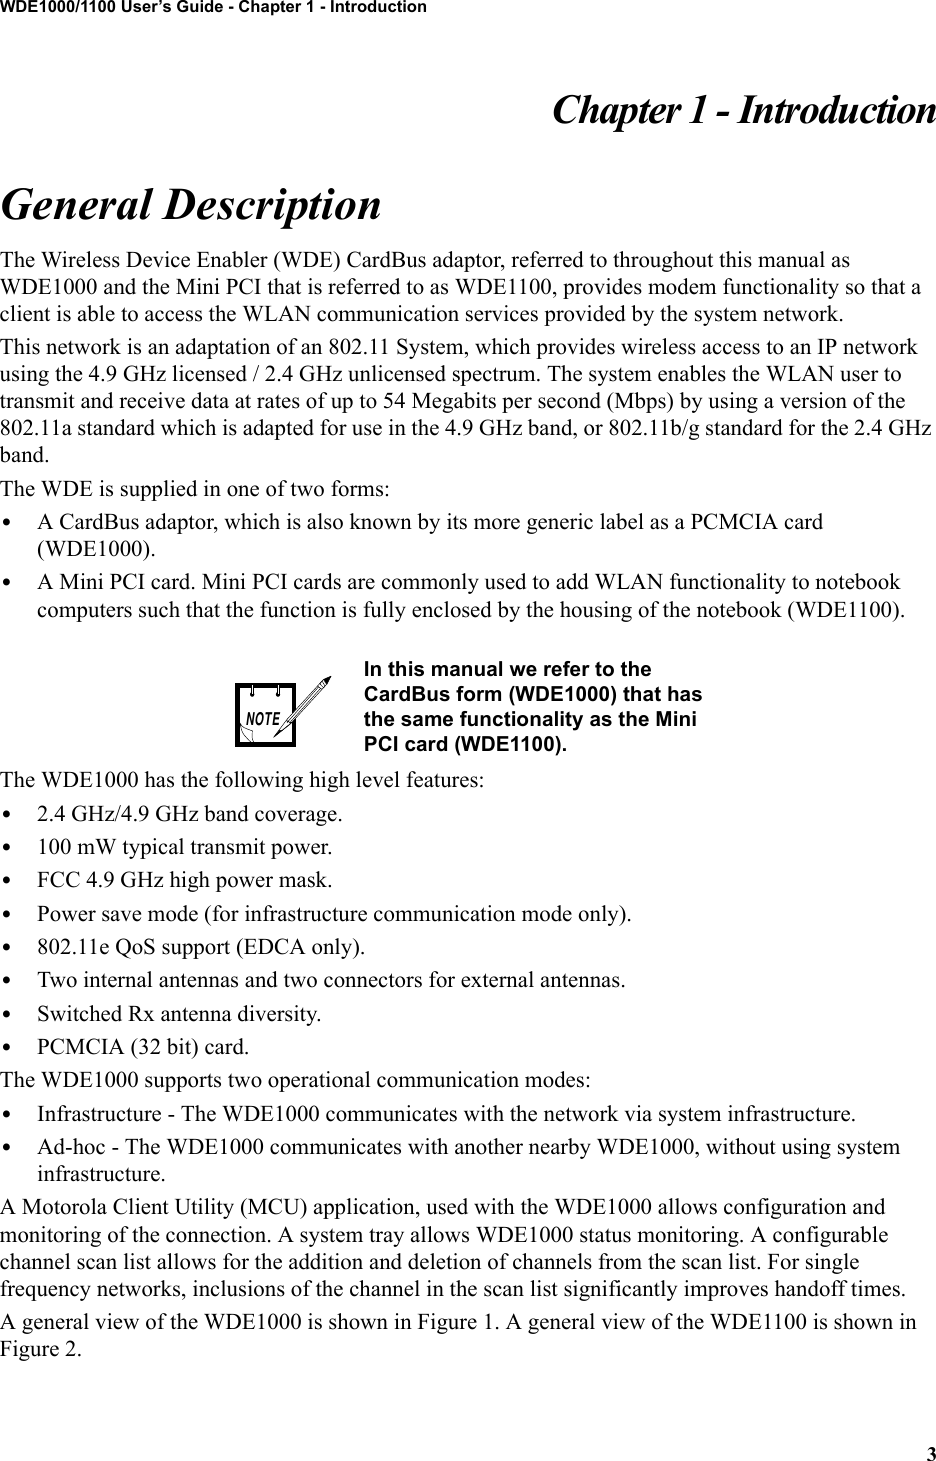 3WDE1000/1100 User’s Guide - Chapter 1 - IntroductionChapter 1 - IntroductionGeneral DescriptionThe Wireless Device Enabler (WDE) CardBus adaptor, referred to throughout this manual as WDE1000 and the Mini PCI that is referred to as WDE1100, provides modem functionality so that a client is able to access the WLAN communication services provided by the system network.This network is an adaptation of an 802.11 System, which provides wireless access to an IP network using the 4.9 GHz licensed / 2.4 GHz unlicensed spectrum. The system enables the WLAN user to transmit and receive data at rates of up to 54 Megabits per second (Mbps) by using a version of the 802.11a standard which is adapted for use in the 4.9 GHz band, or 802.11b/g standard for the 2.4 GHz band.The WDE is supplied in one of two forms: •A CardBus adaptor, which is also known by its more generic label as a PCMCIA card (WDE1000). •A Mini PCI card. Mini PCI cards are commonly used to add WLAN functionality to notebook computers such that the function is fully enclosed by the housing of the notebook (WDE1100).The WDE1000 has the following high level features:•2.4 GHz/4.9 GHz band coverage.•100 mW typical transmit power.•FCC 4.9 GHz high power mask.•Power save mode (for infrastructure communication mode only).•802.11e QoS support (EDCA only).•Two internal antennas and two connectors for external antennas.•Switched Rx antenna diversity.•PCMCIA (32 bit) card.The WDE1000 supports two operational communication modes:•Infrastructure - The WDE1000 communicates with the network via system infrastructure.•Ad-hoc - The WDE1000 communicates with another nearby WDE1000, without using system infrastructure.A Motorola Client Utility (MCU) application, used with the WDE1000 allows configuration and monitoring of the connection. A system tray allows WDE1000 status monitoring. A configurable channel scan list allows for the addition and deletion of channels from the scan list. For single frequency networks, inclusions of the channel in the scan list significantly improves handoff times.A general view of the WDE1000 is shown in Figure 1. A general view of the WDE1100 is shown in Figure 2.In this manual we refer to the CardBus form (WDE1000) that has the same functionality as the Mini PCI card (WDE1100).NOTE